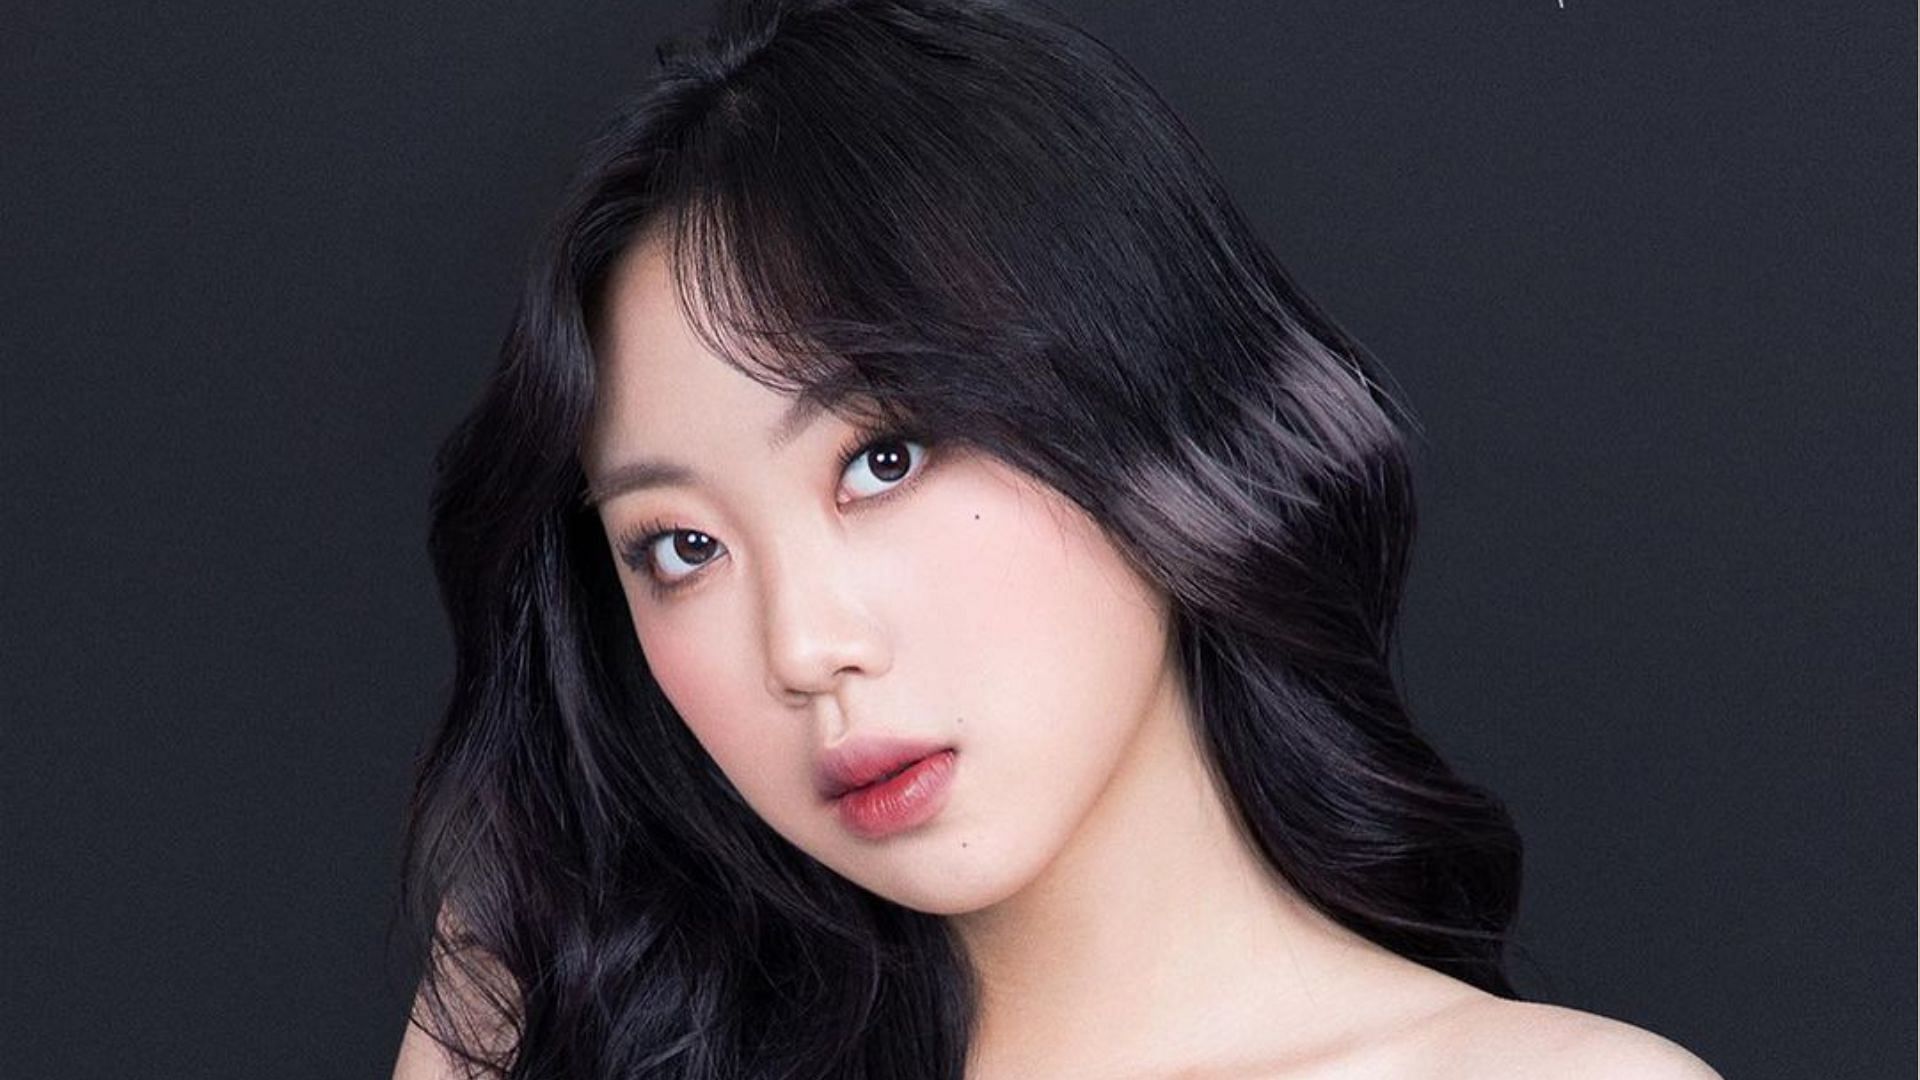 It actually happened a few years ago”: Netizens react to Lee Youngji's past  clip of using the N-word resurfacing on Twitter